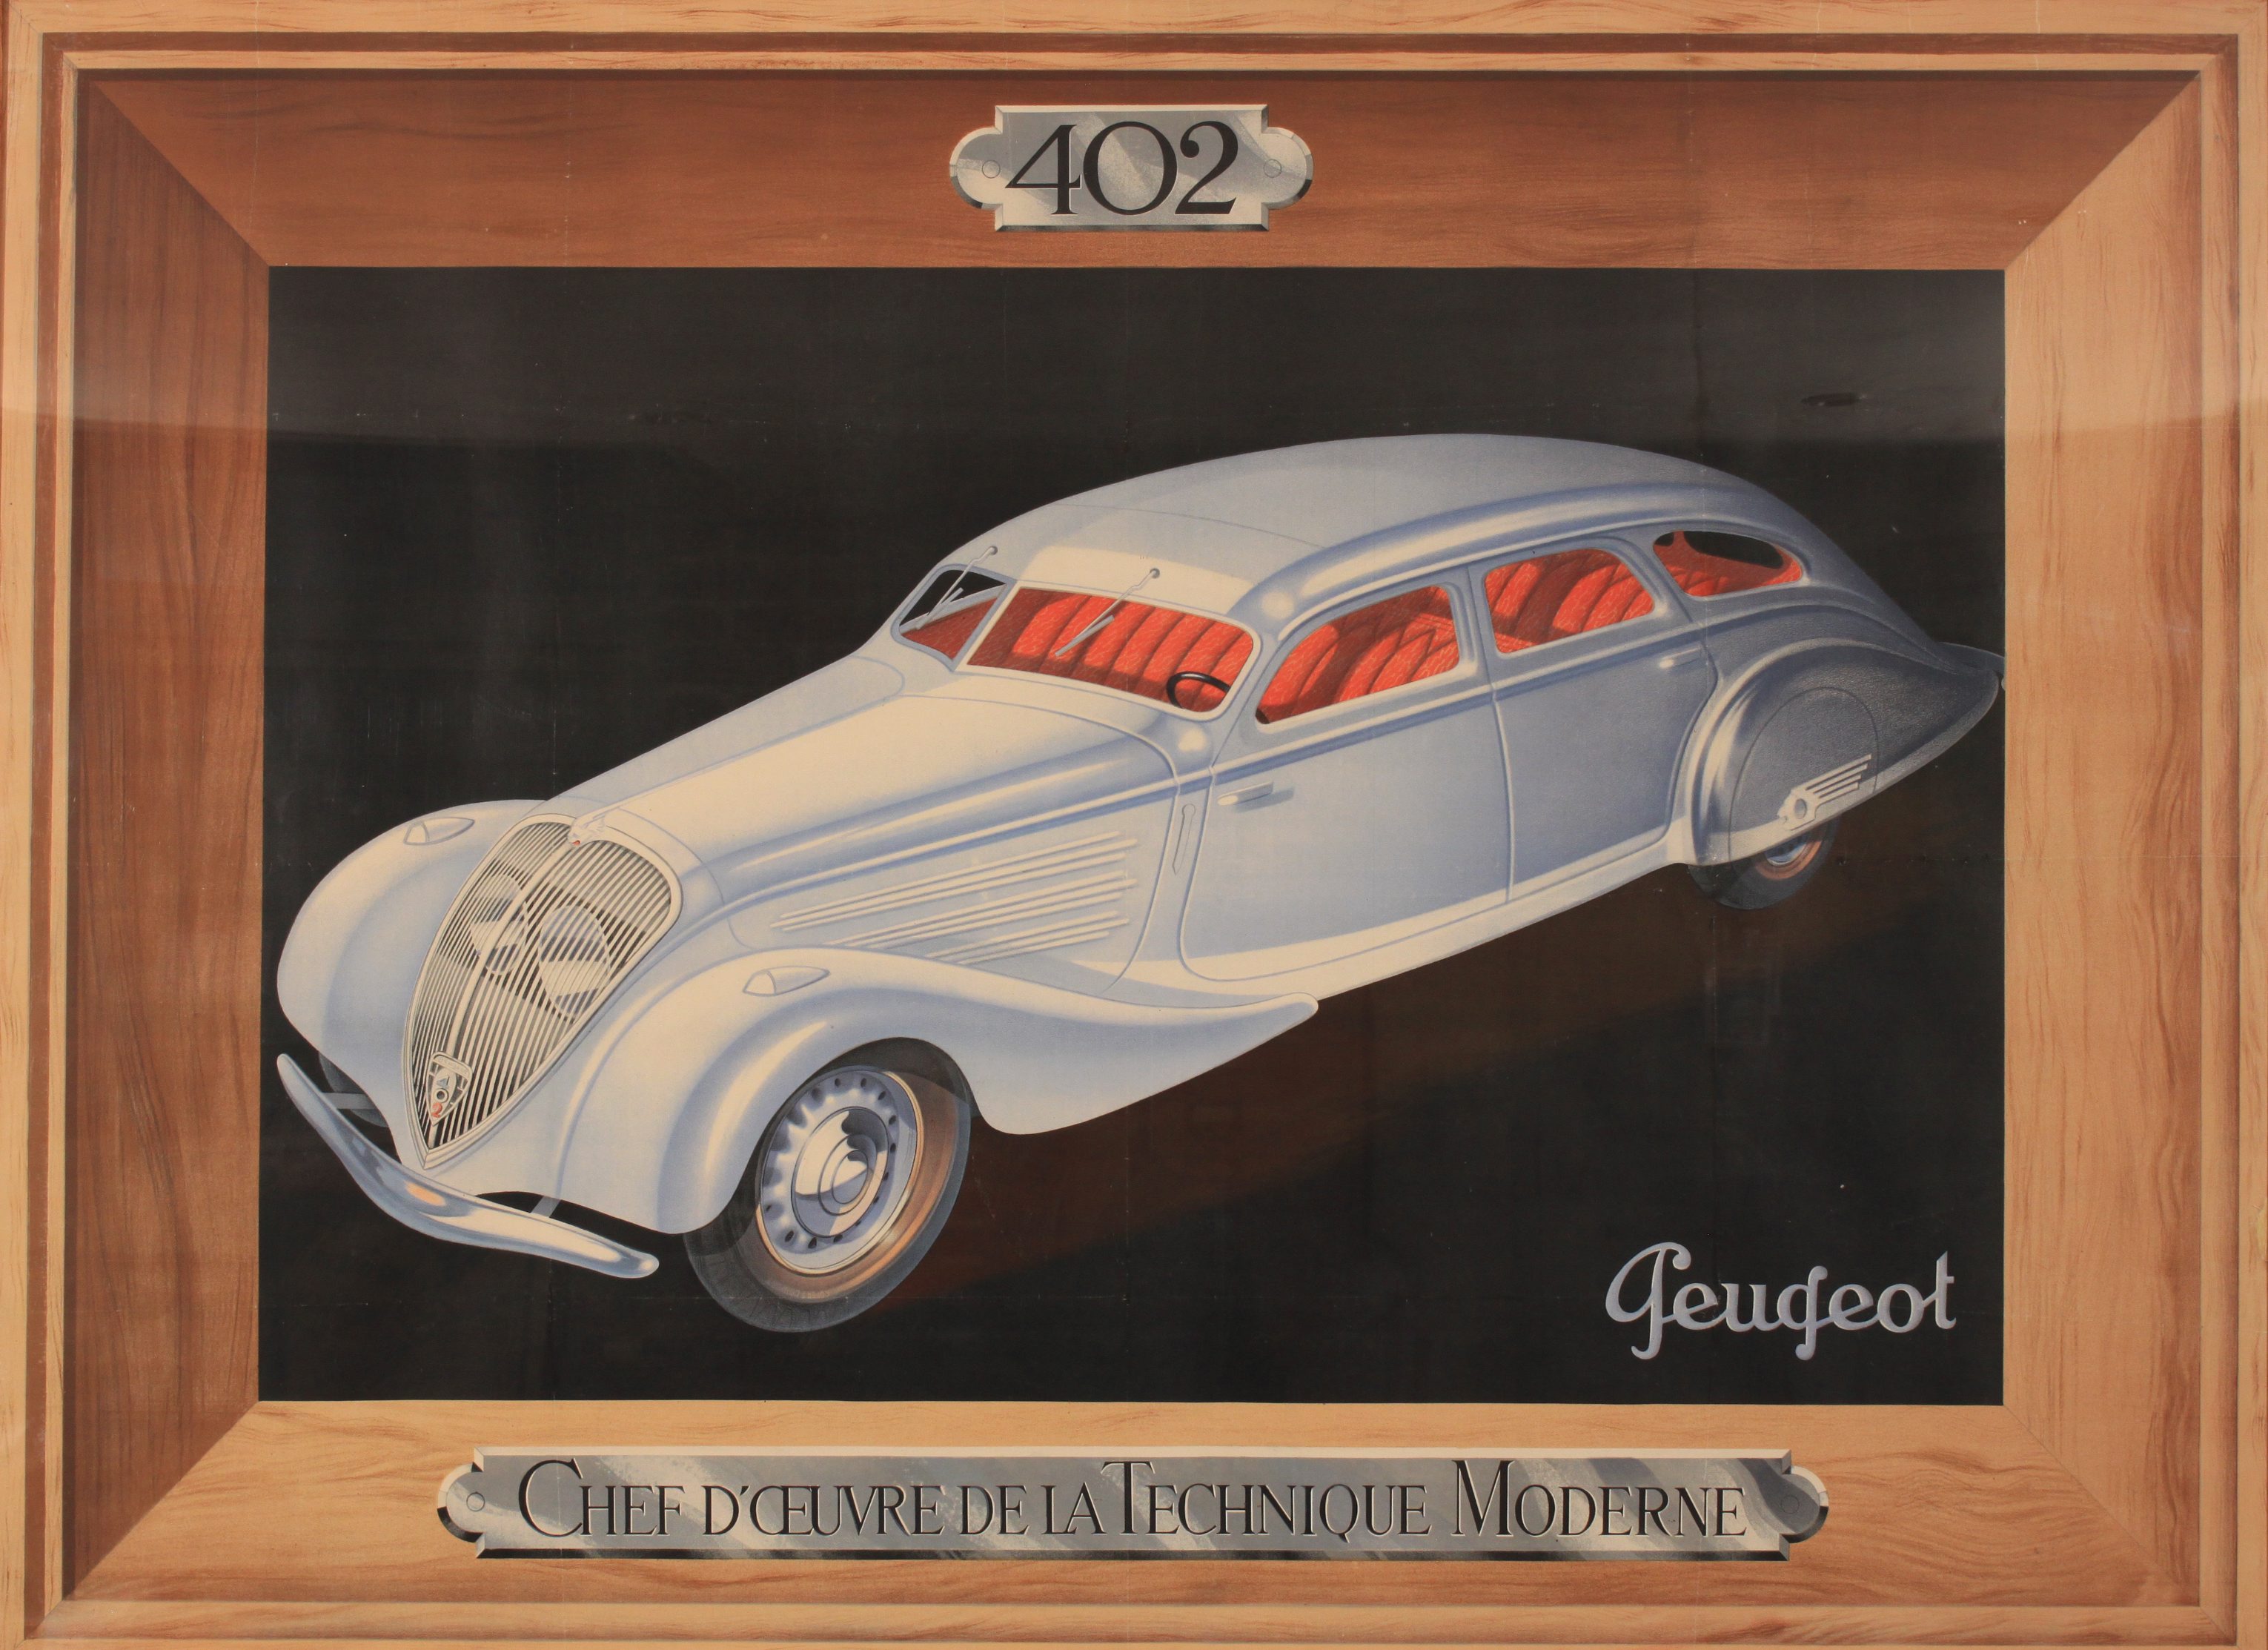 Anon Peugeot 402, original poster printed by Draeger, circa 1935. Onslows image